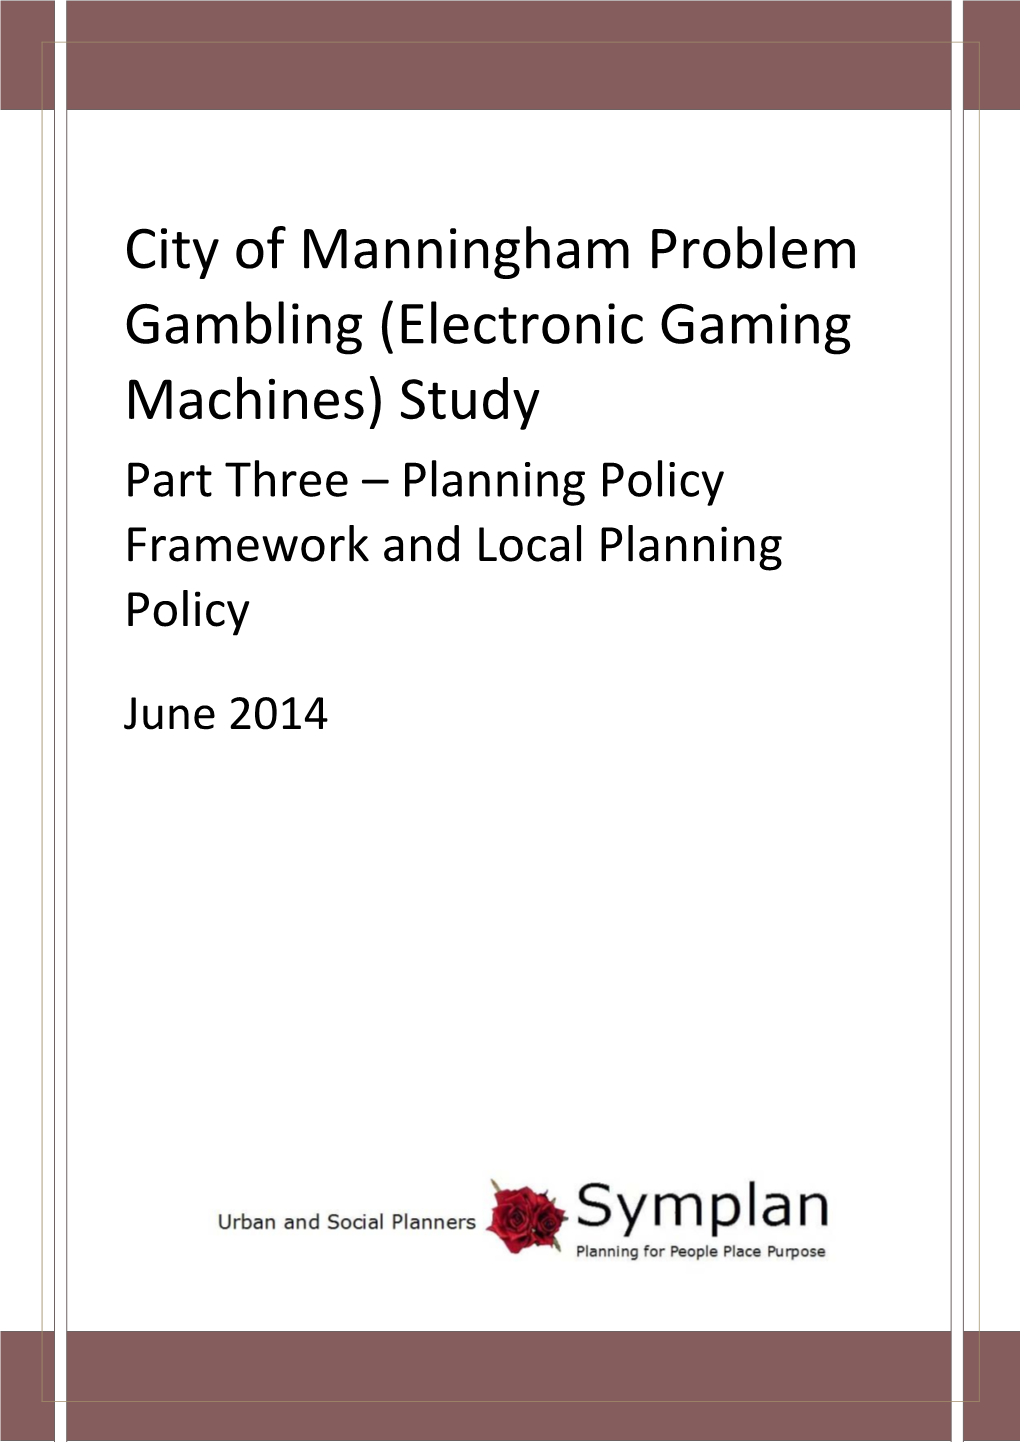 (Electronic Gaming Machines) Study Part Three – Planning Policy Framework and Local Planning Policy